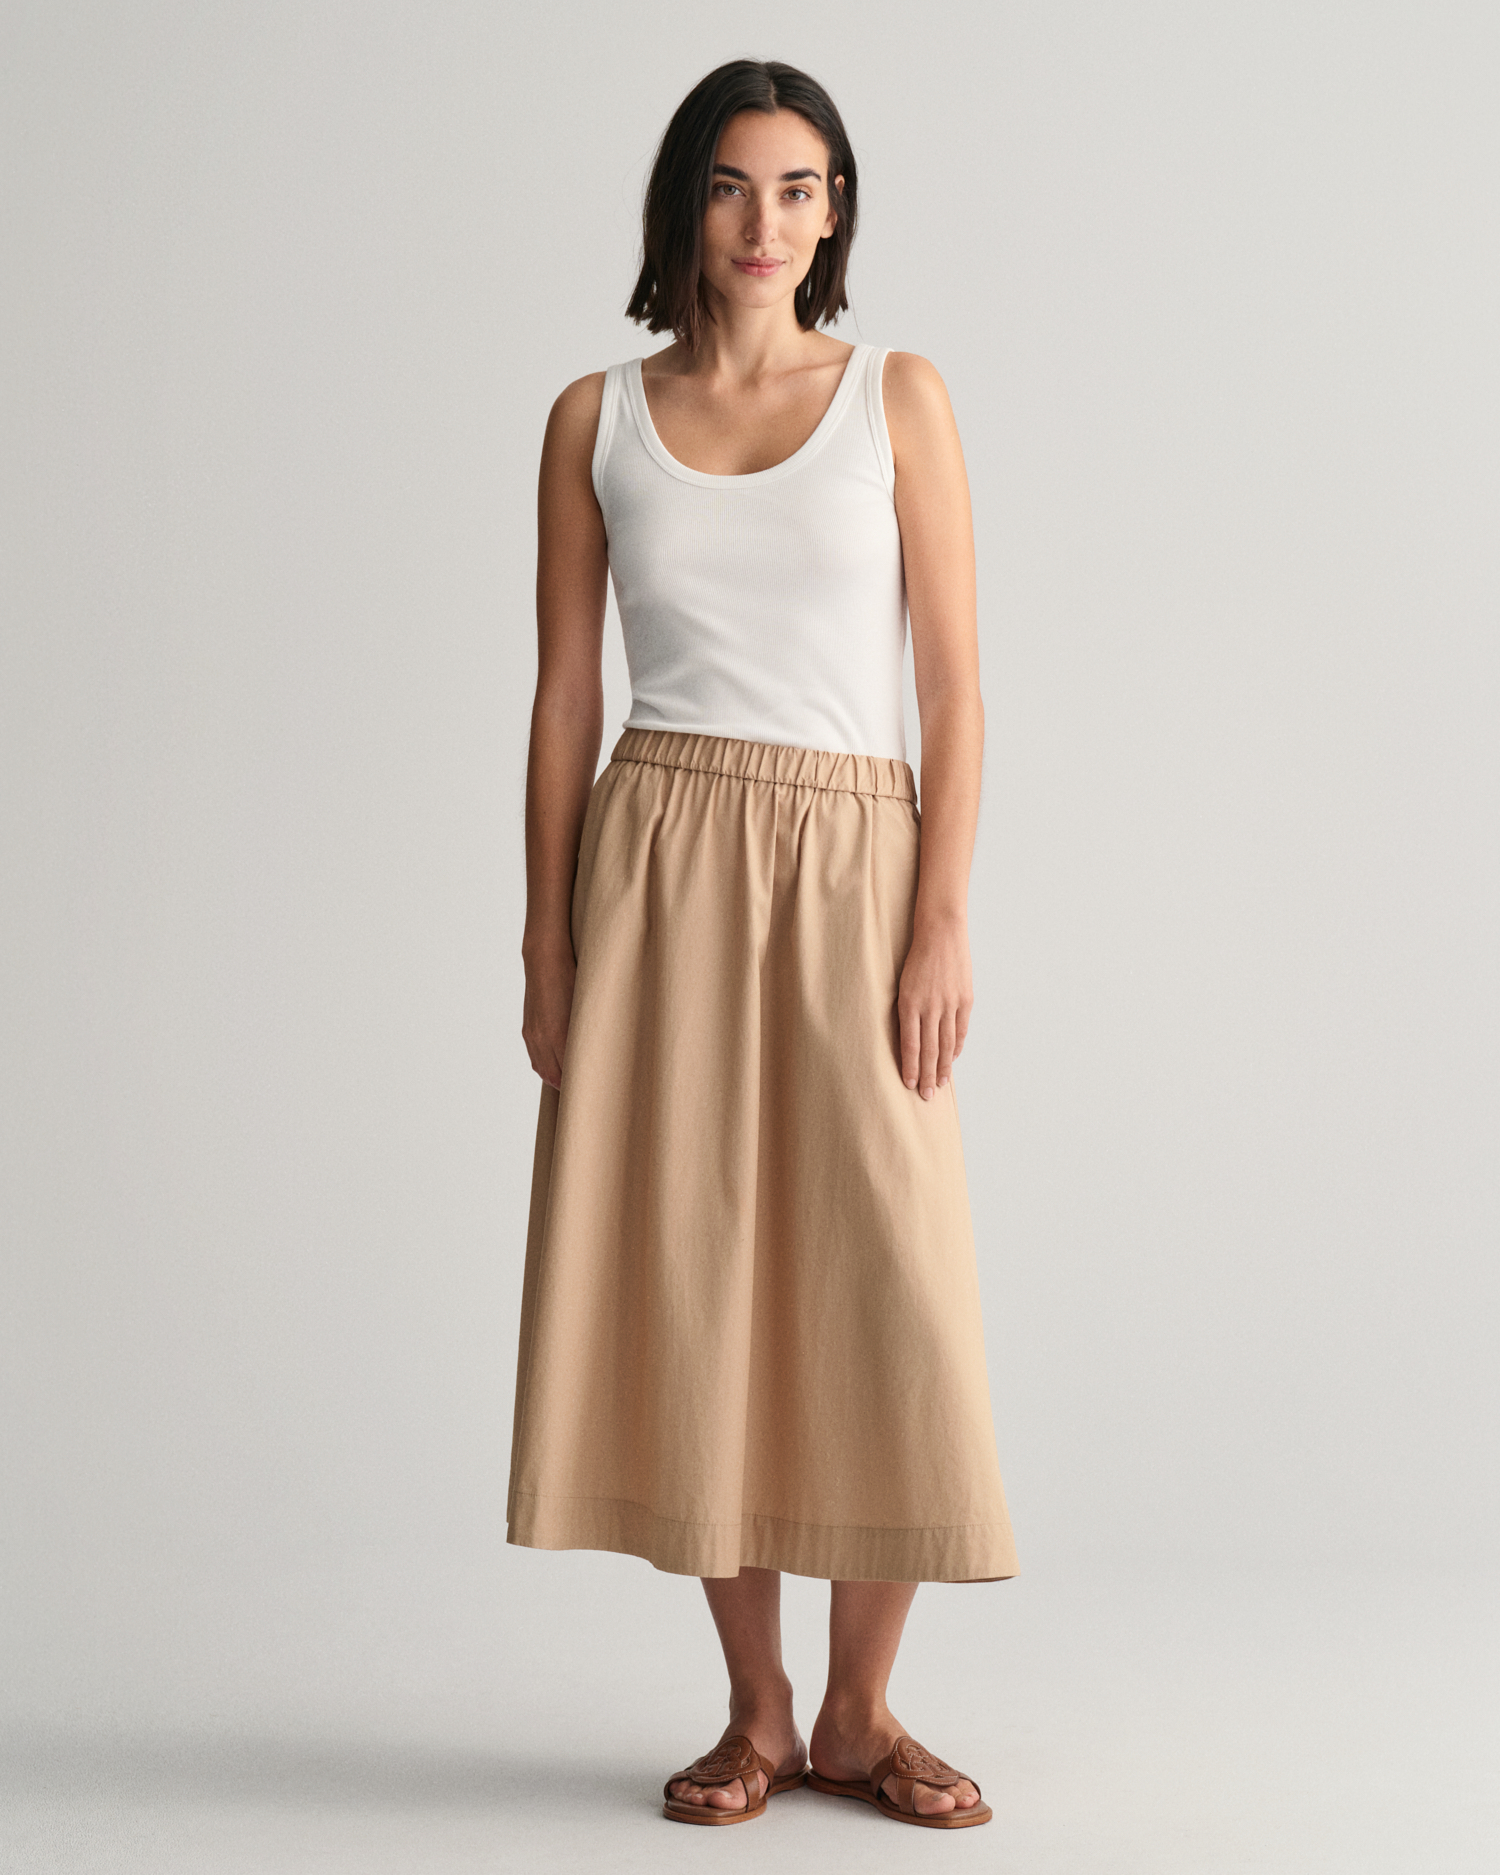 Flared Chino Skirt From Japan (COSMO) - スカート